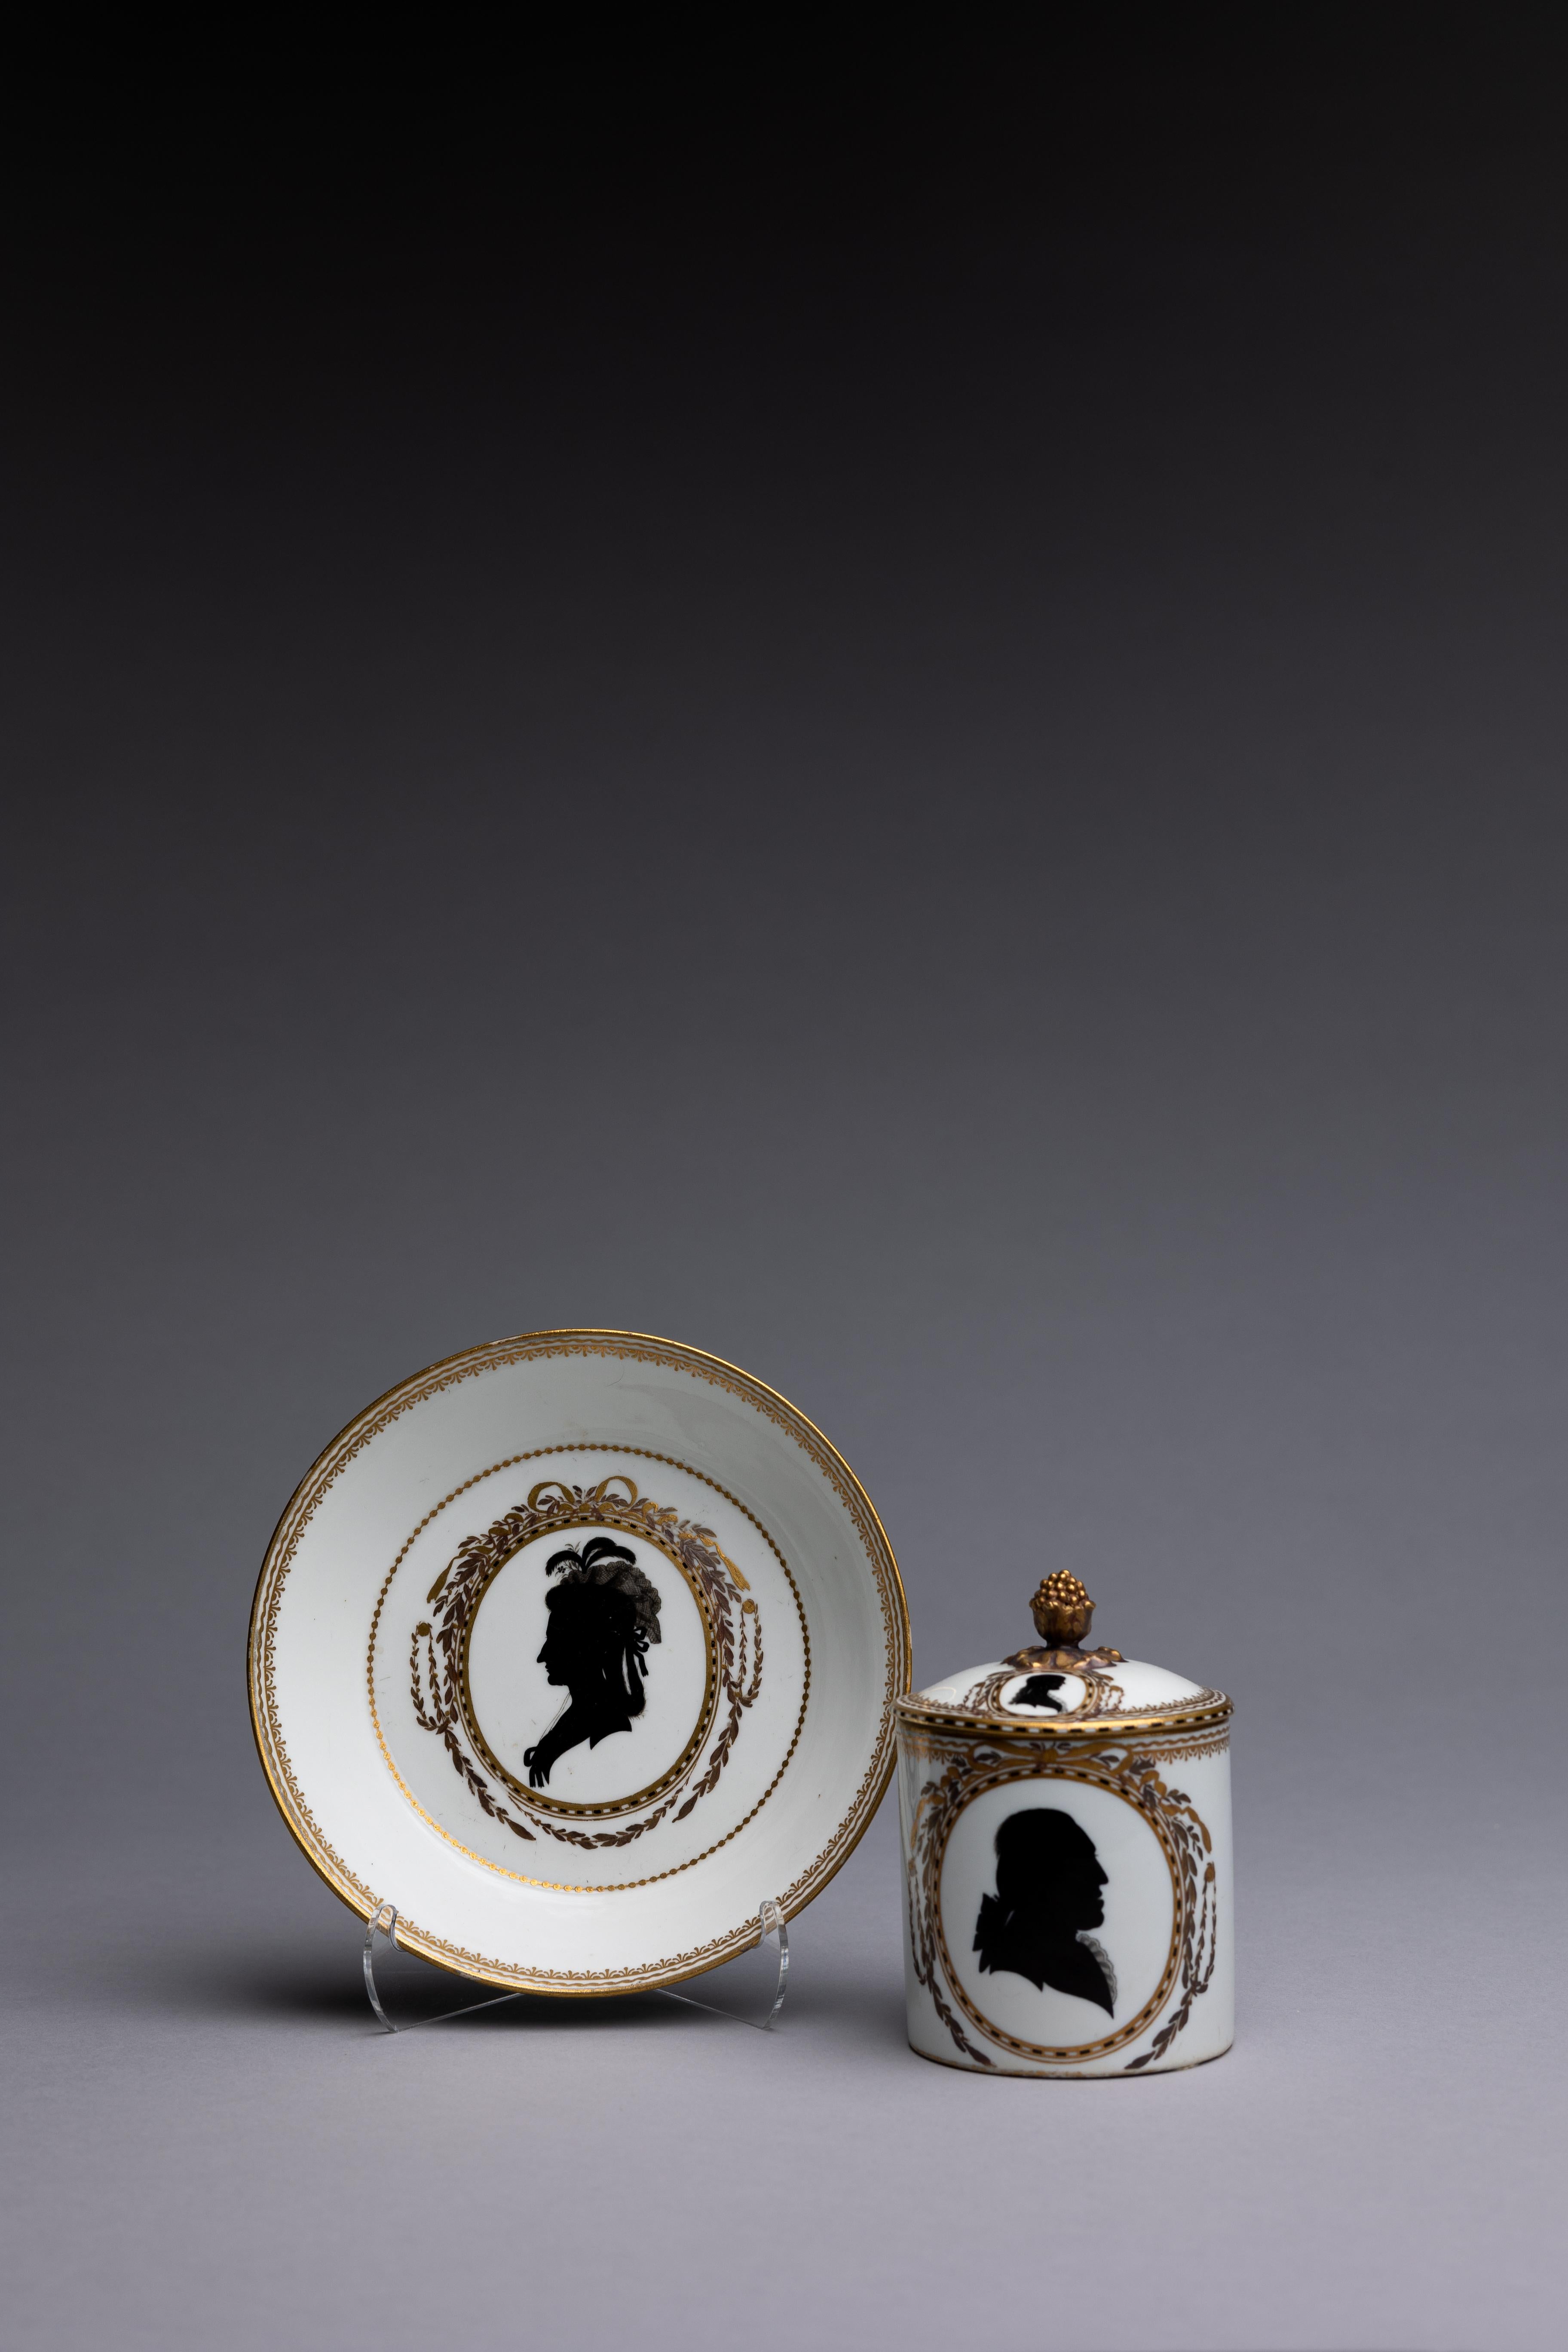 A Meissen porcelain cup and saucer from the Marcolini period, dating around 1795, decorated with silhouette designs attributed to Samuel Mohn.

In 1774, Saxon court minister Count Camillo Marcolini became the director of the Meissen Porcelain